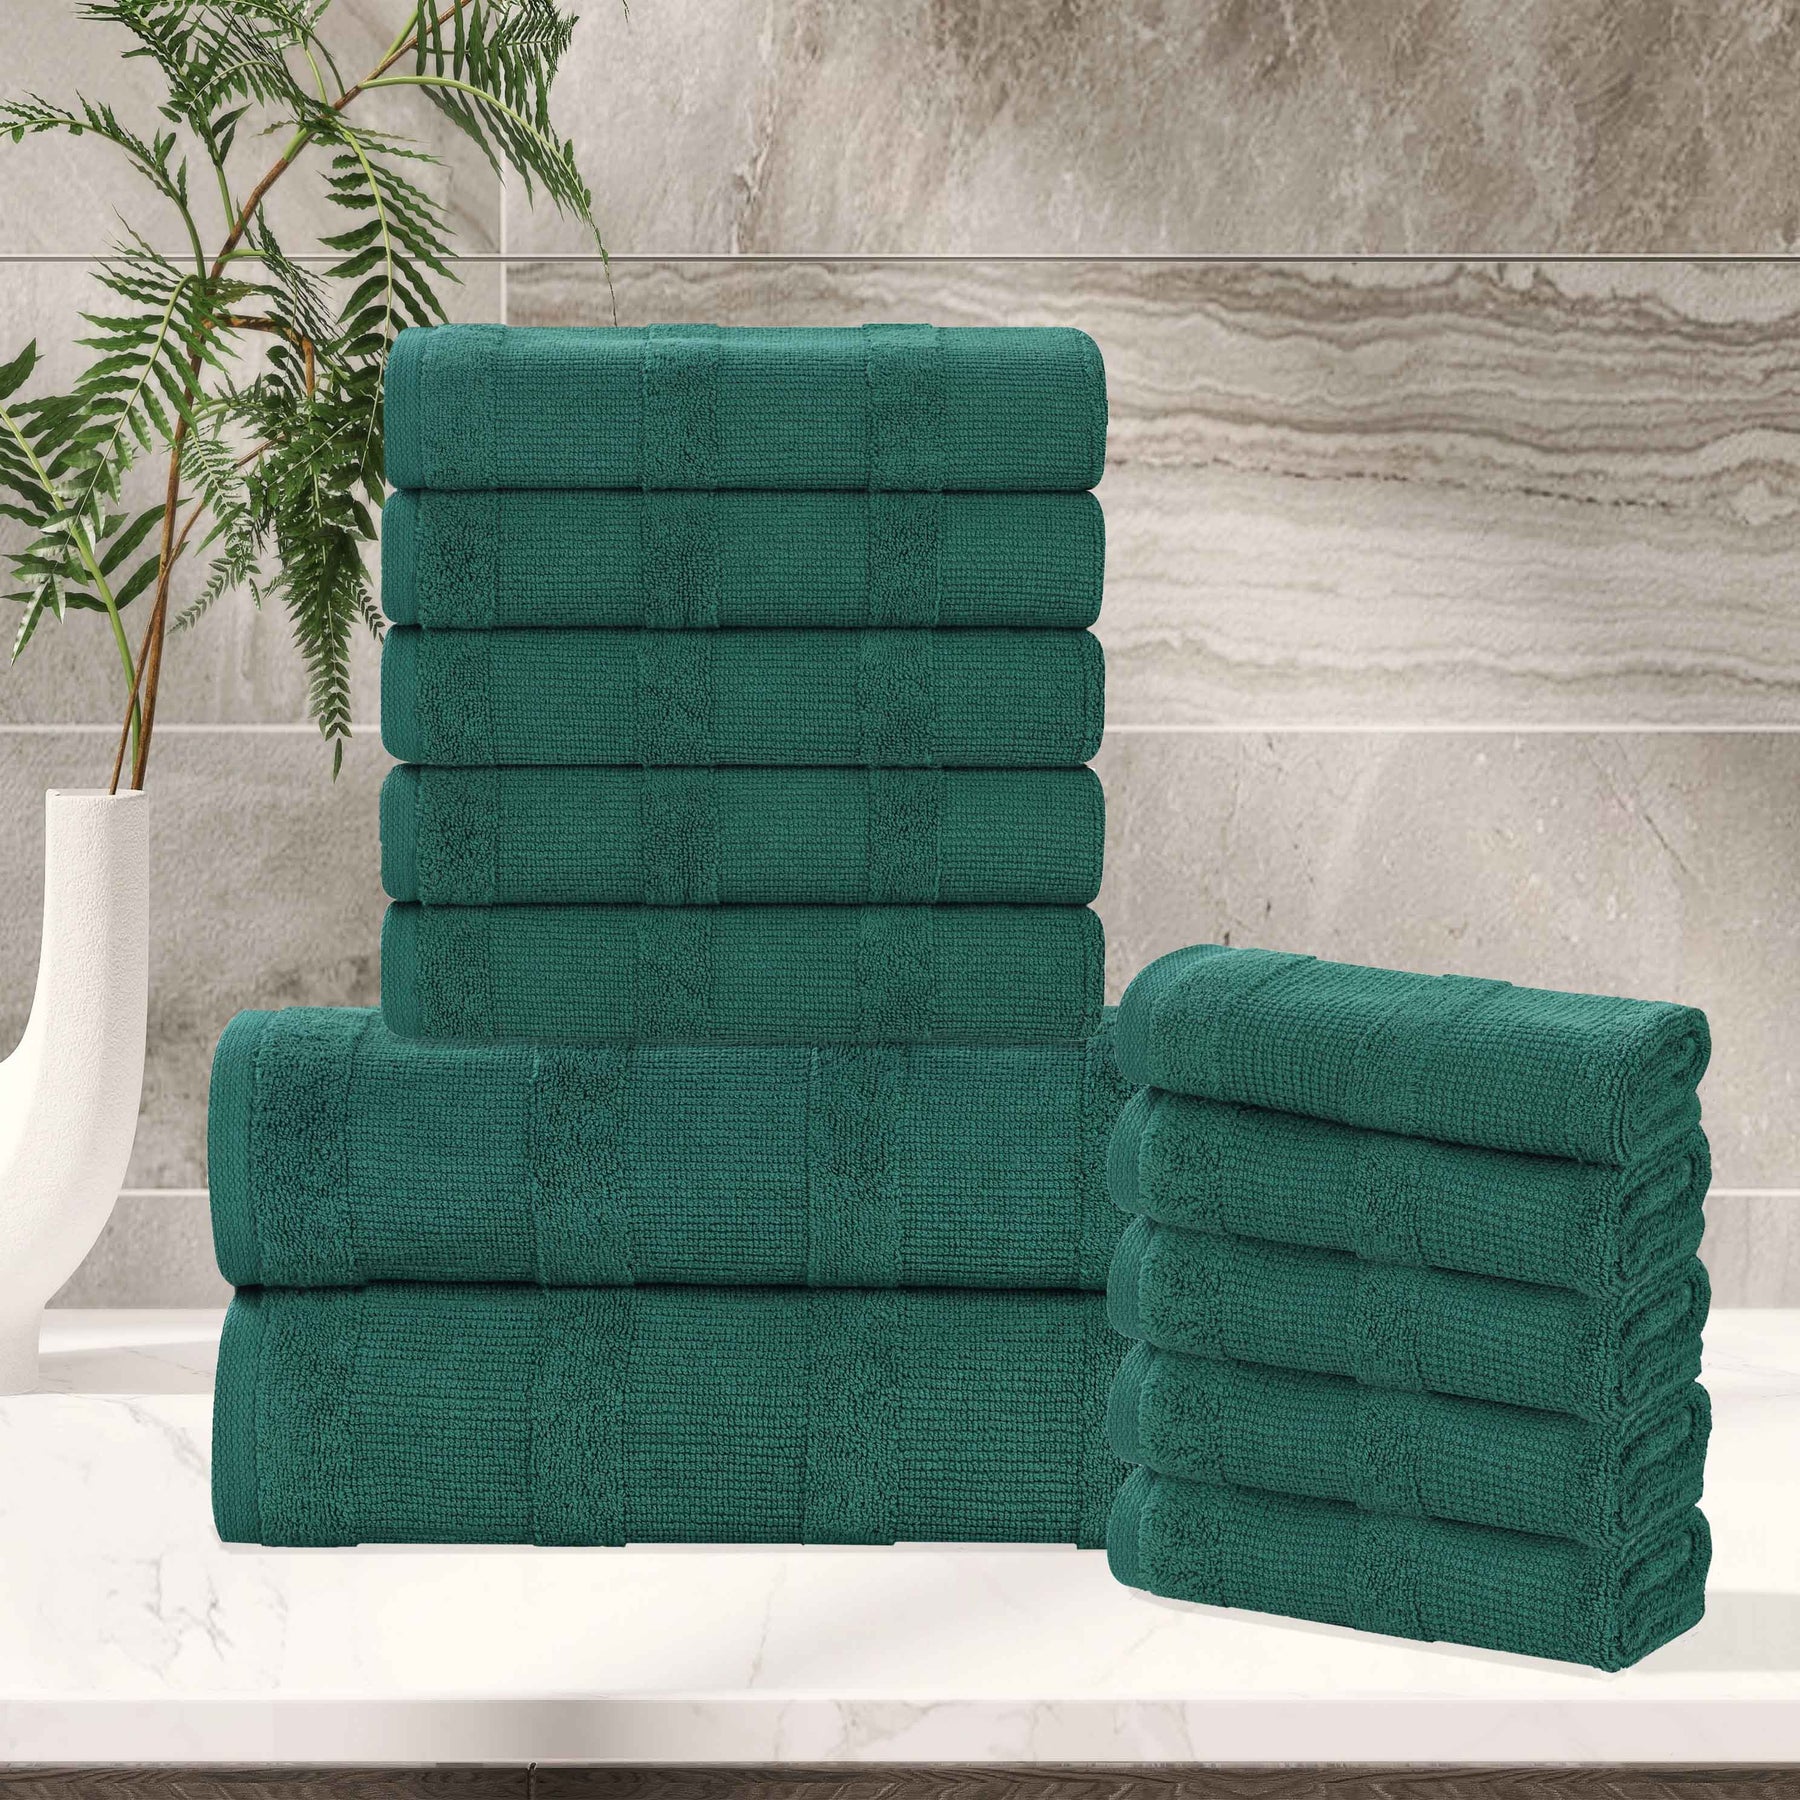 Roma Cotton Ribbed Textured Soft Absorbent 12 Piece Assorted Towel Set - Evergreen